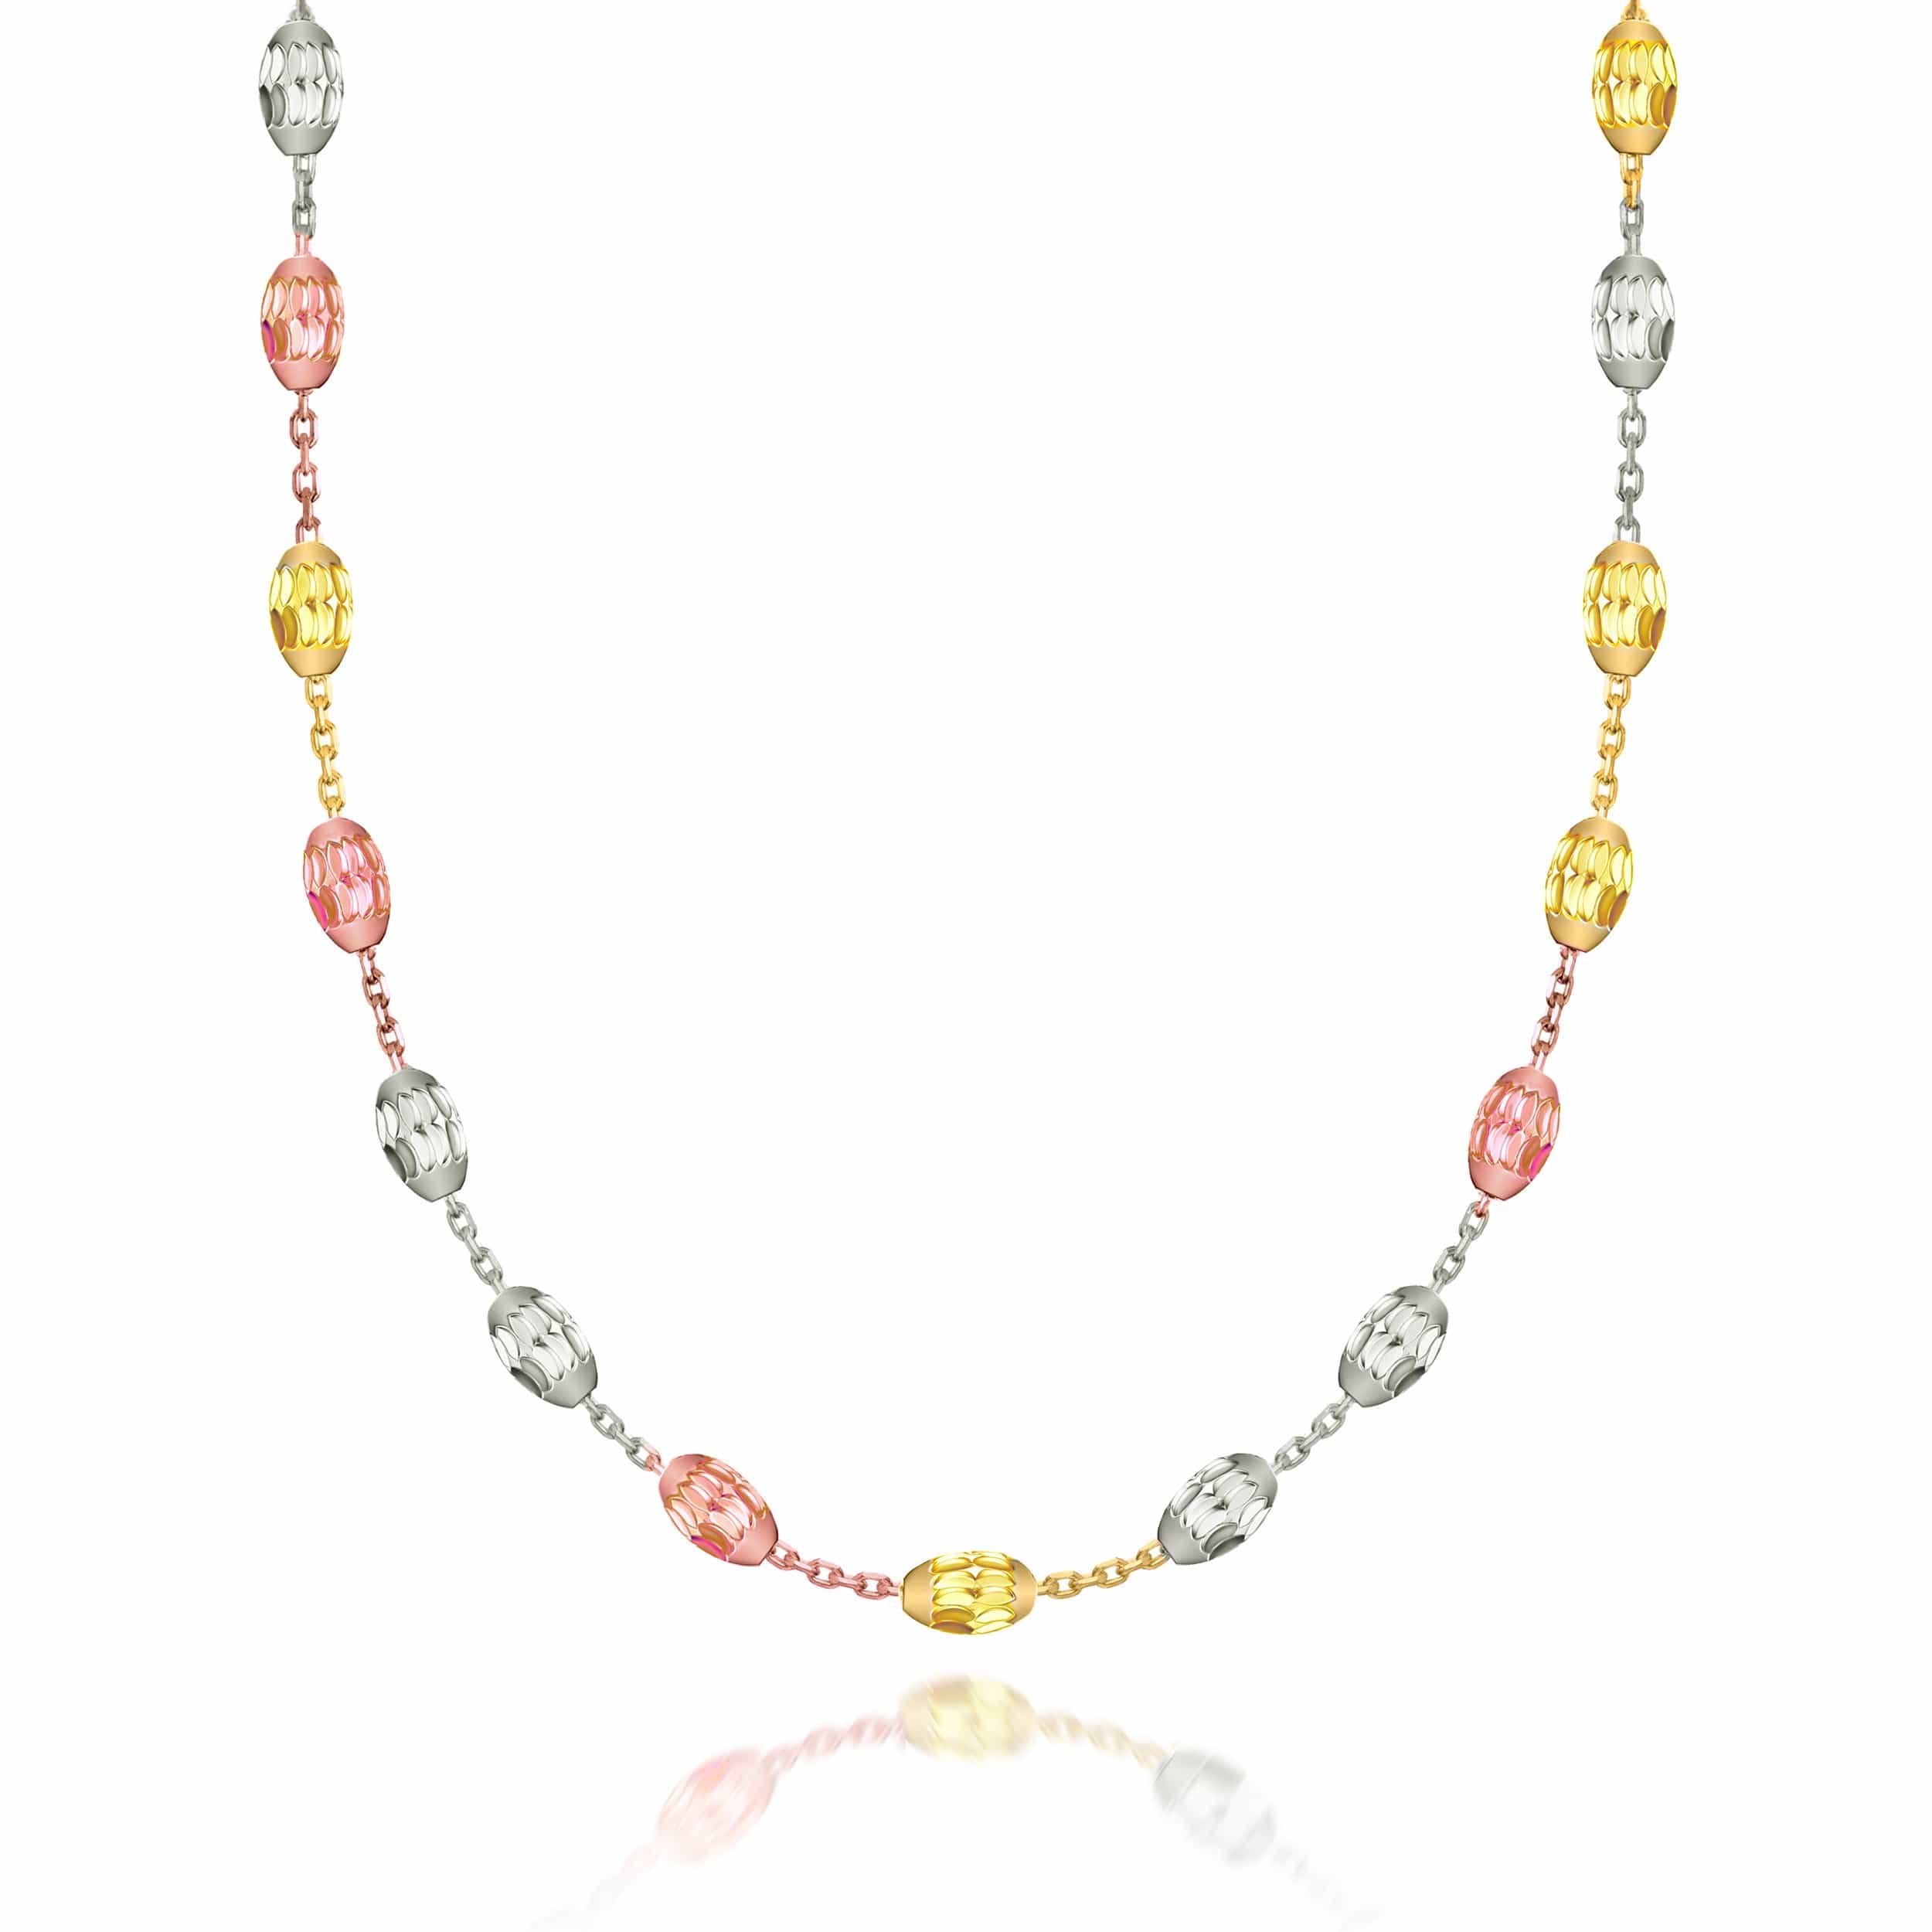 Lynora Jewellery Necklace Geobeads Mixed Necklace Sterling Silver